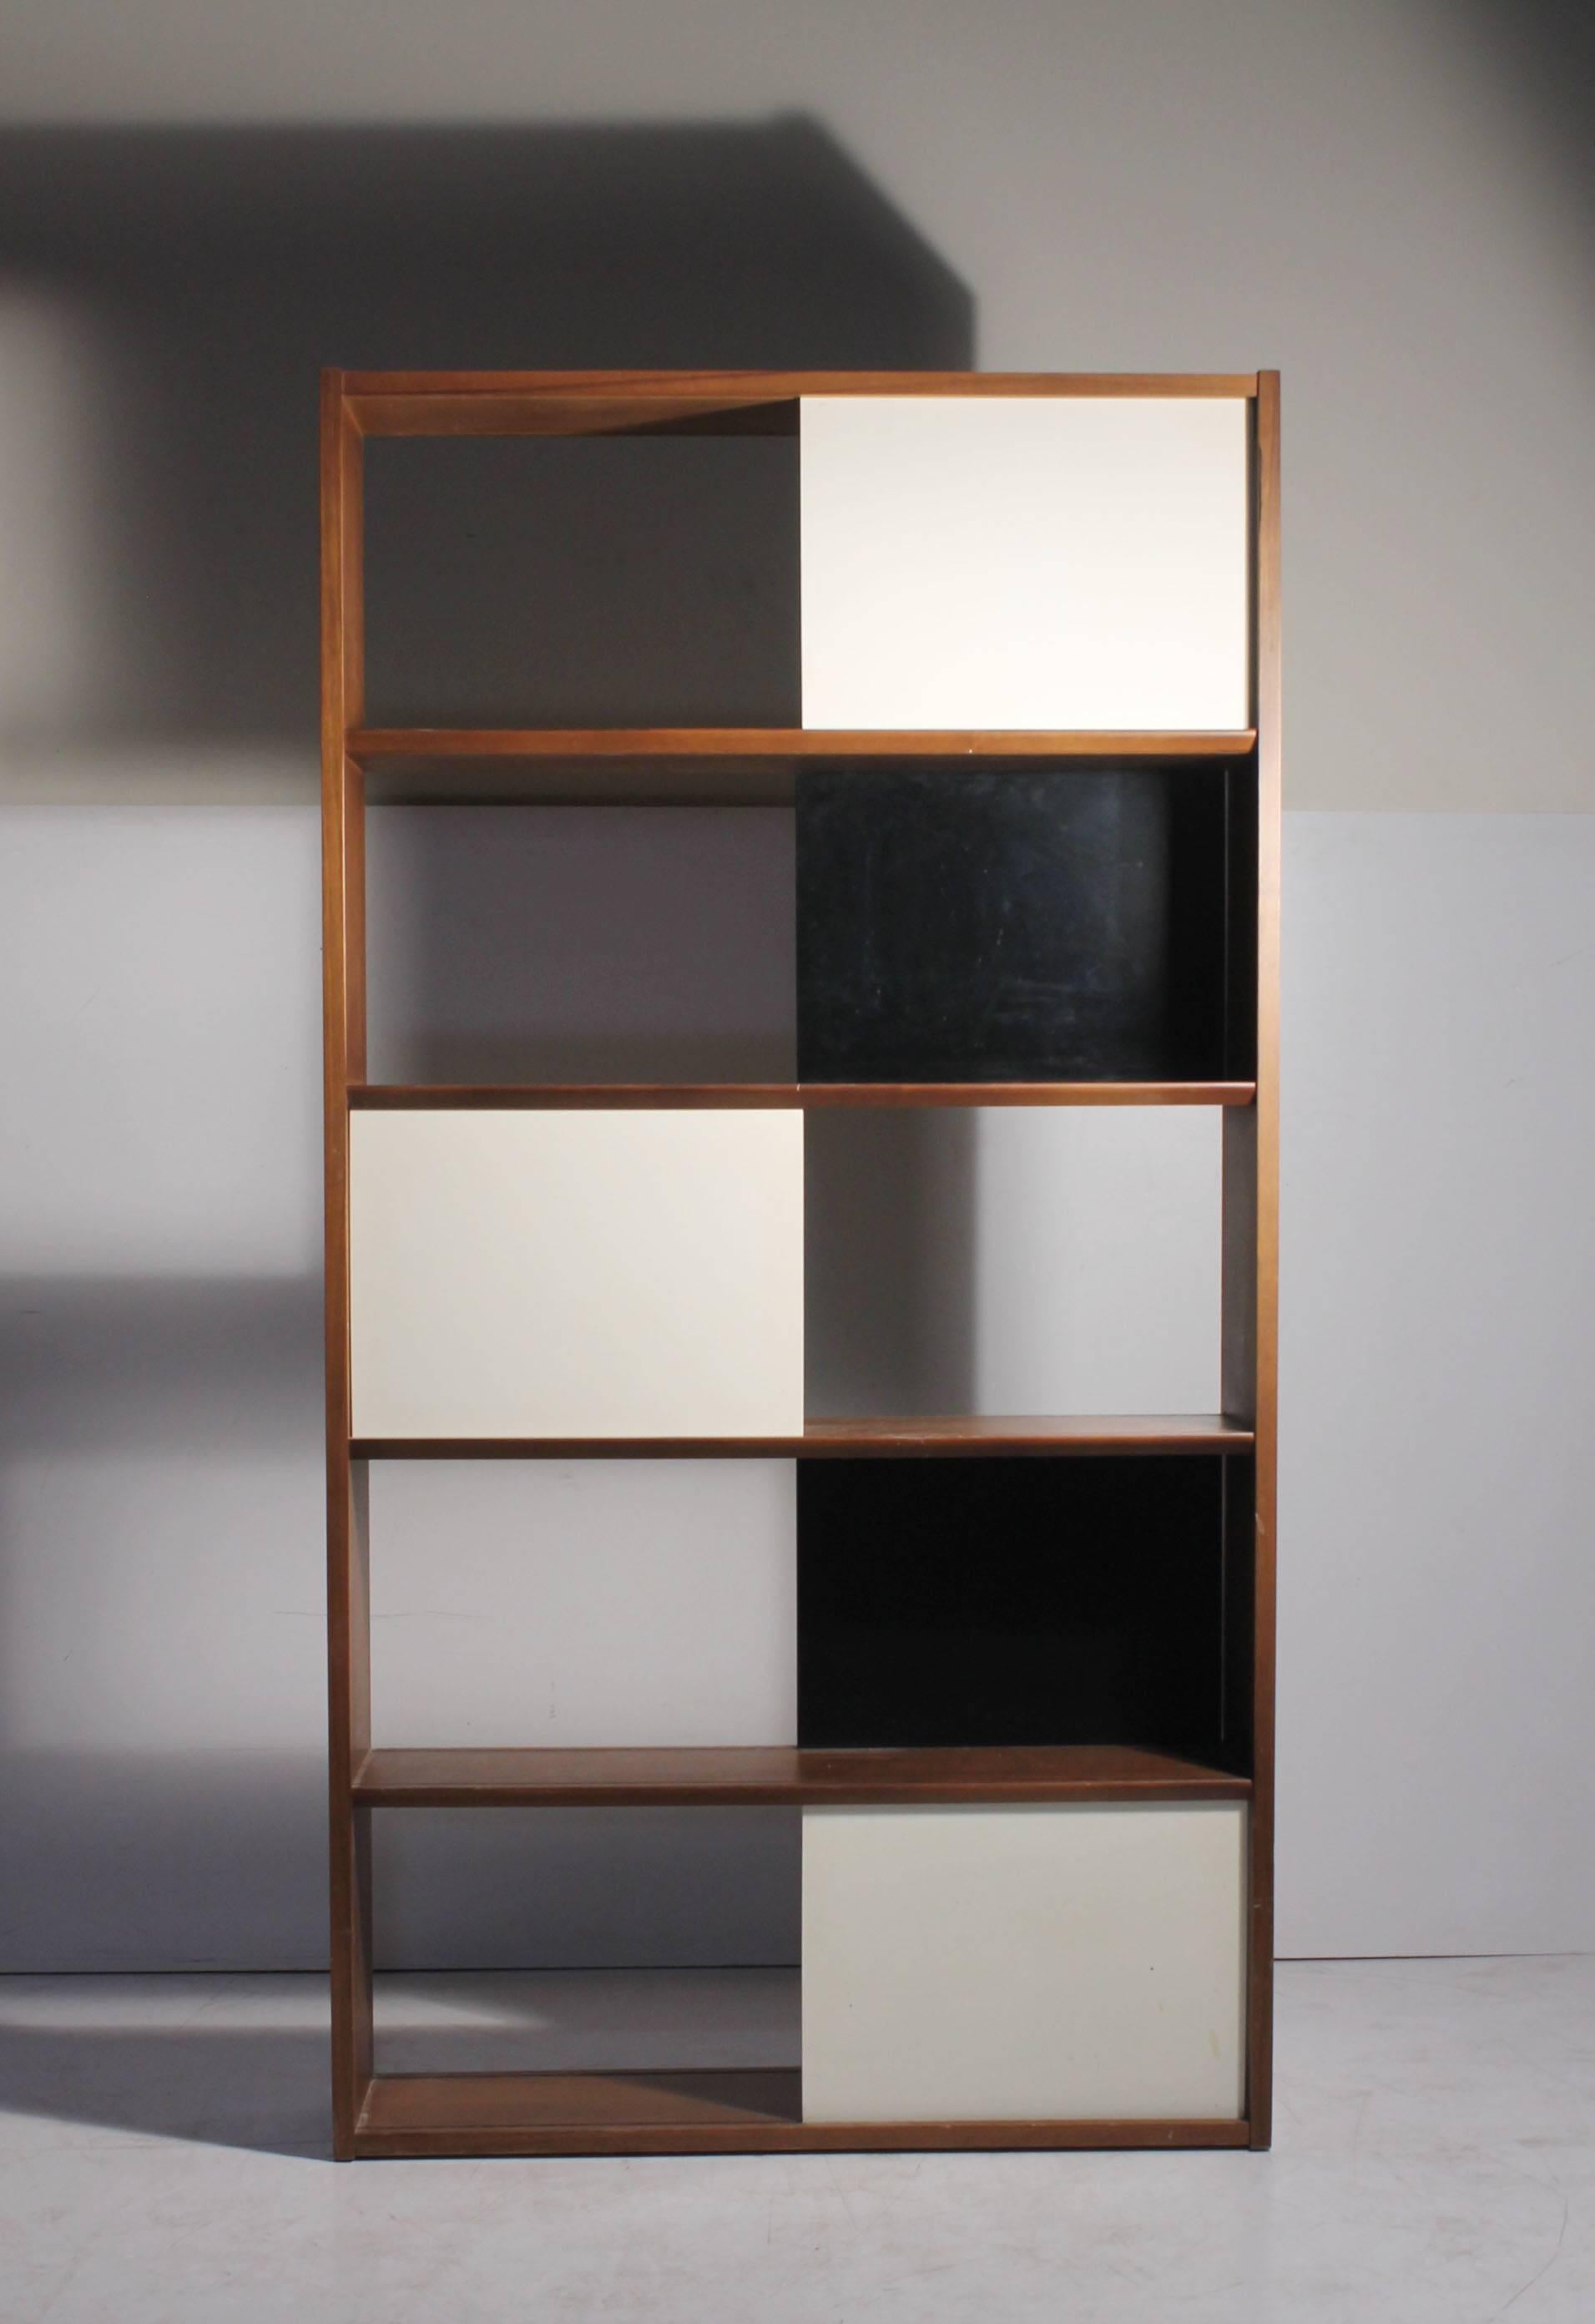 Evans Clark single book shelf Glenn of California. The use of the solid color panels is reminicent of work by Jean Prouve, Charles Eames and Milo Baughman.  Black and white panels slide side to side. The Shelf can be oriented in any direction. There